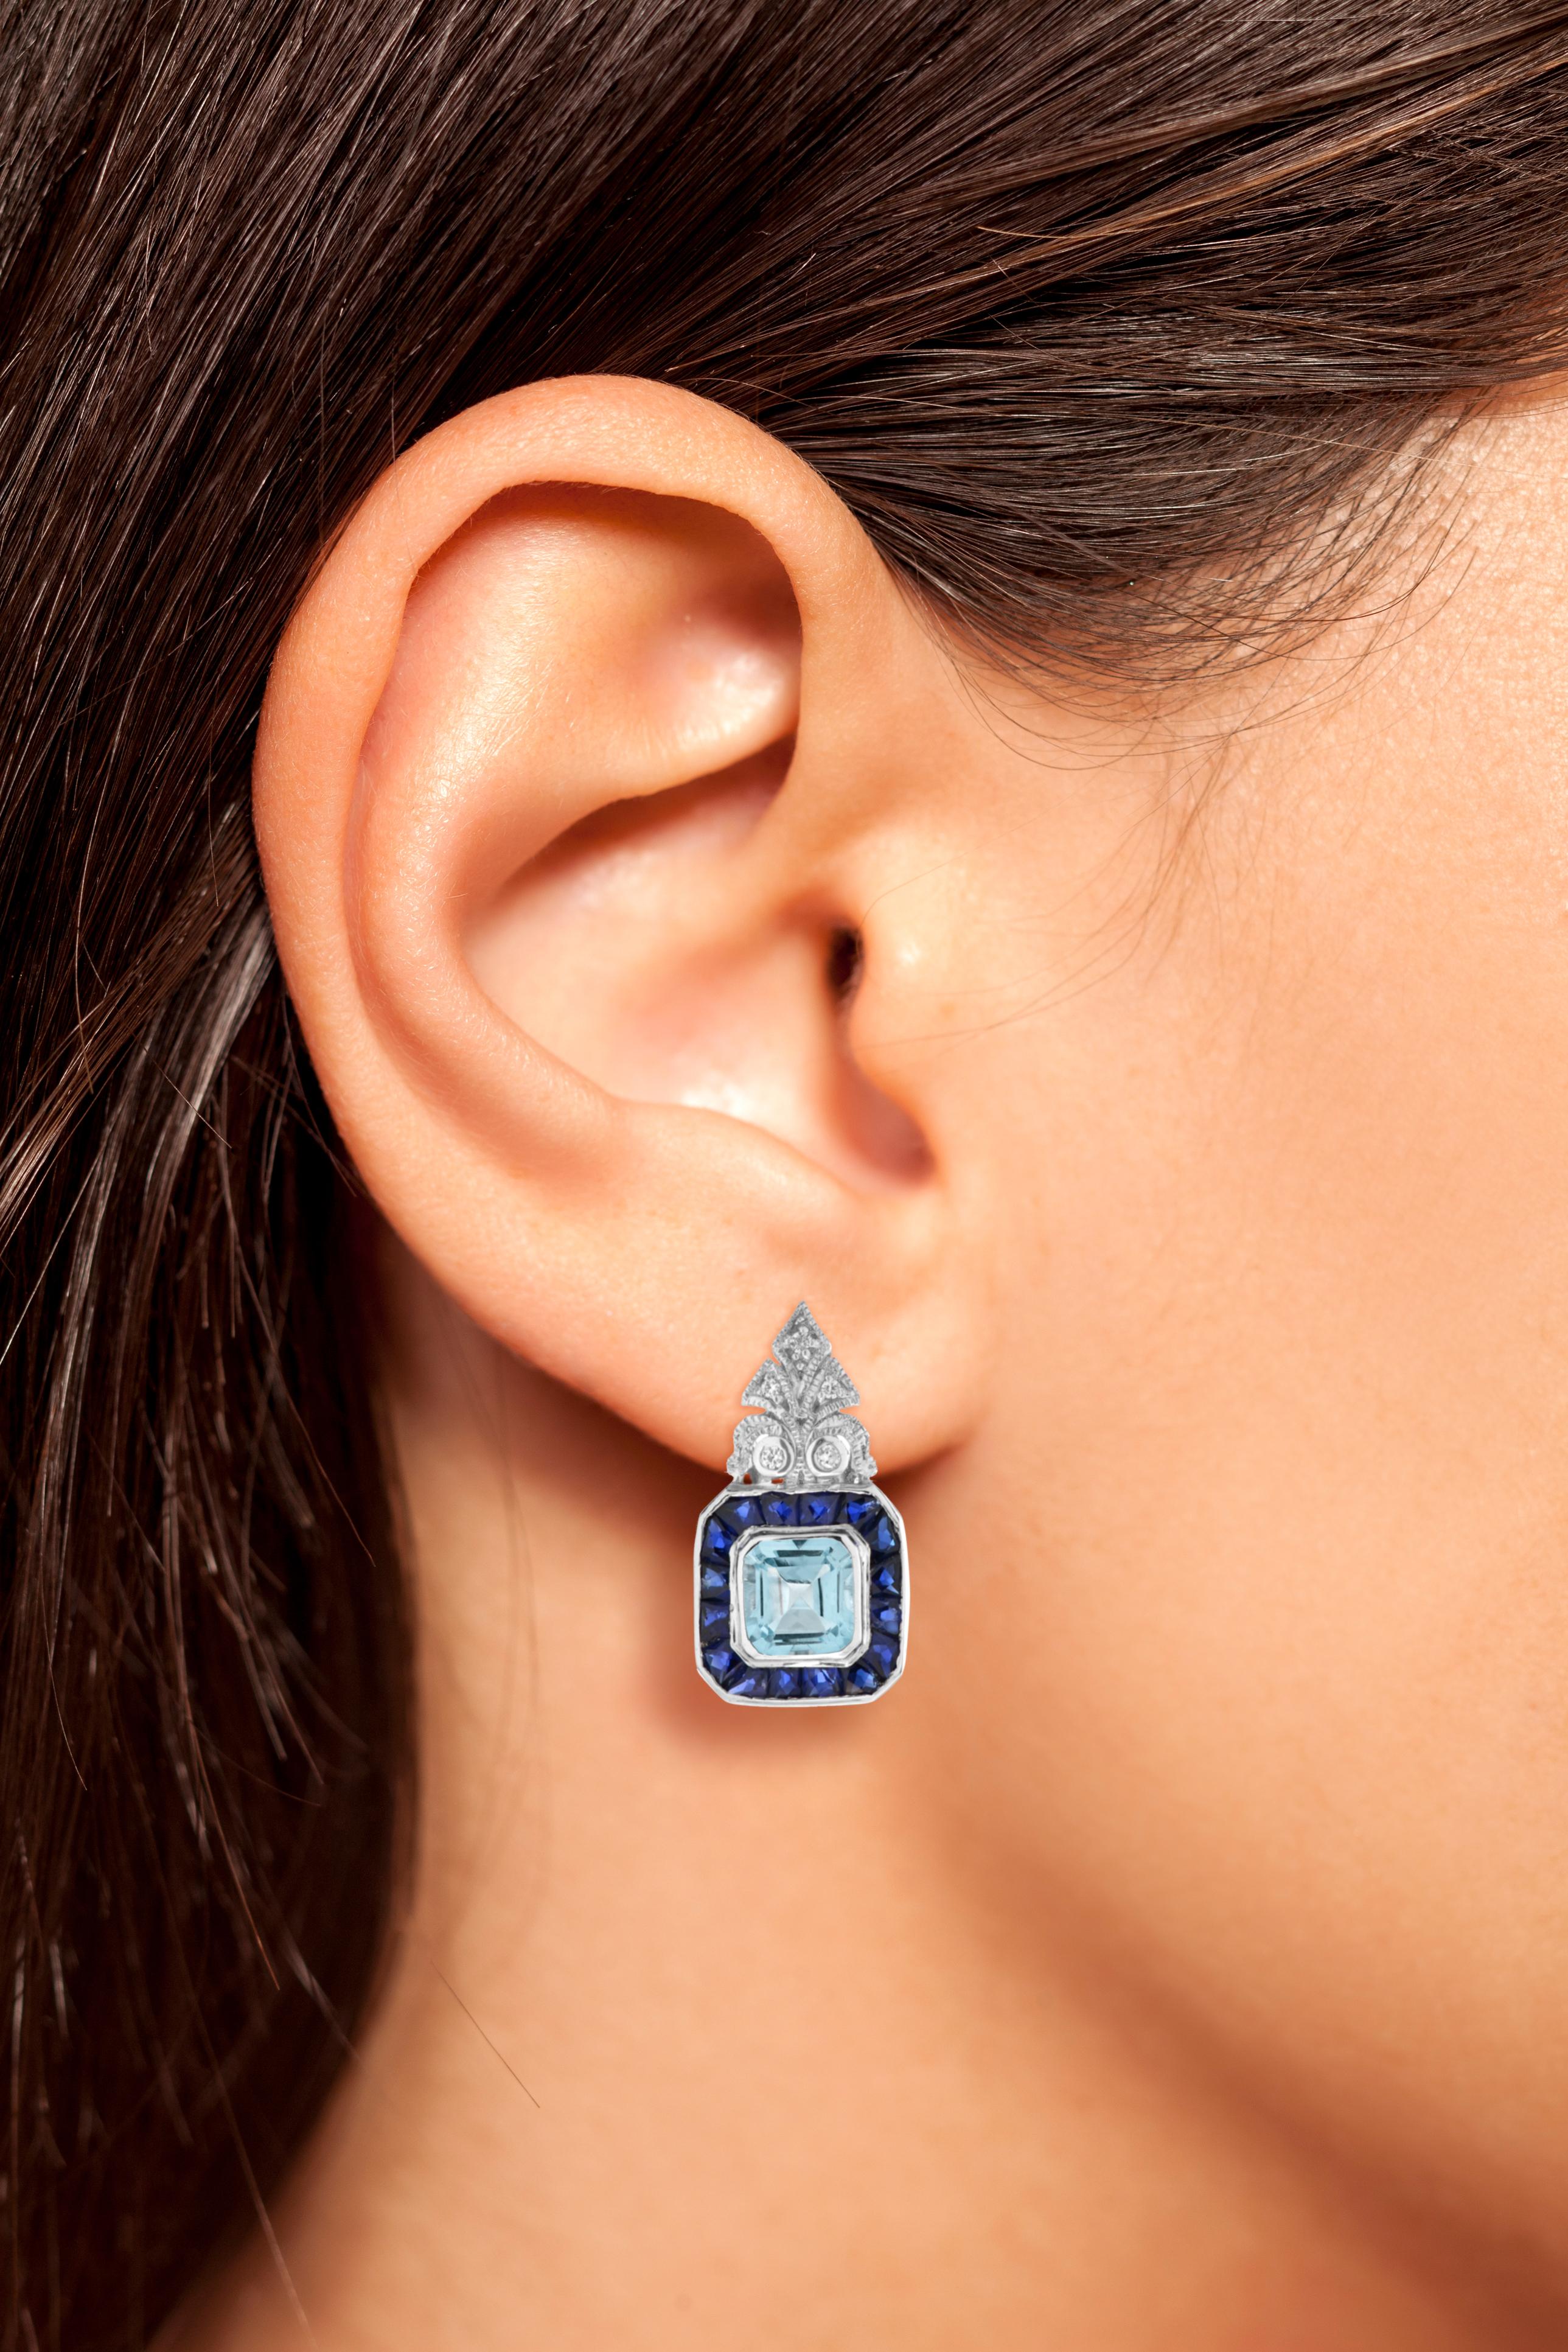 A pair of vintage aquamarine drop earrings, each earring consisted of an emerald cut aquamarine surround by a row of French cut sapphires, suspended from a round diamond-set top. These eye-catching earrings would pair perfectly with a sleek cocktail